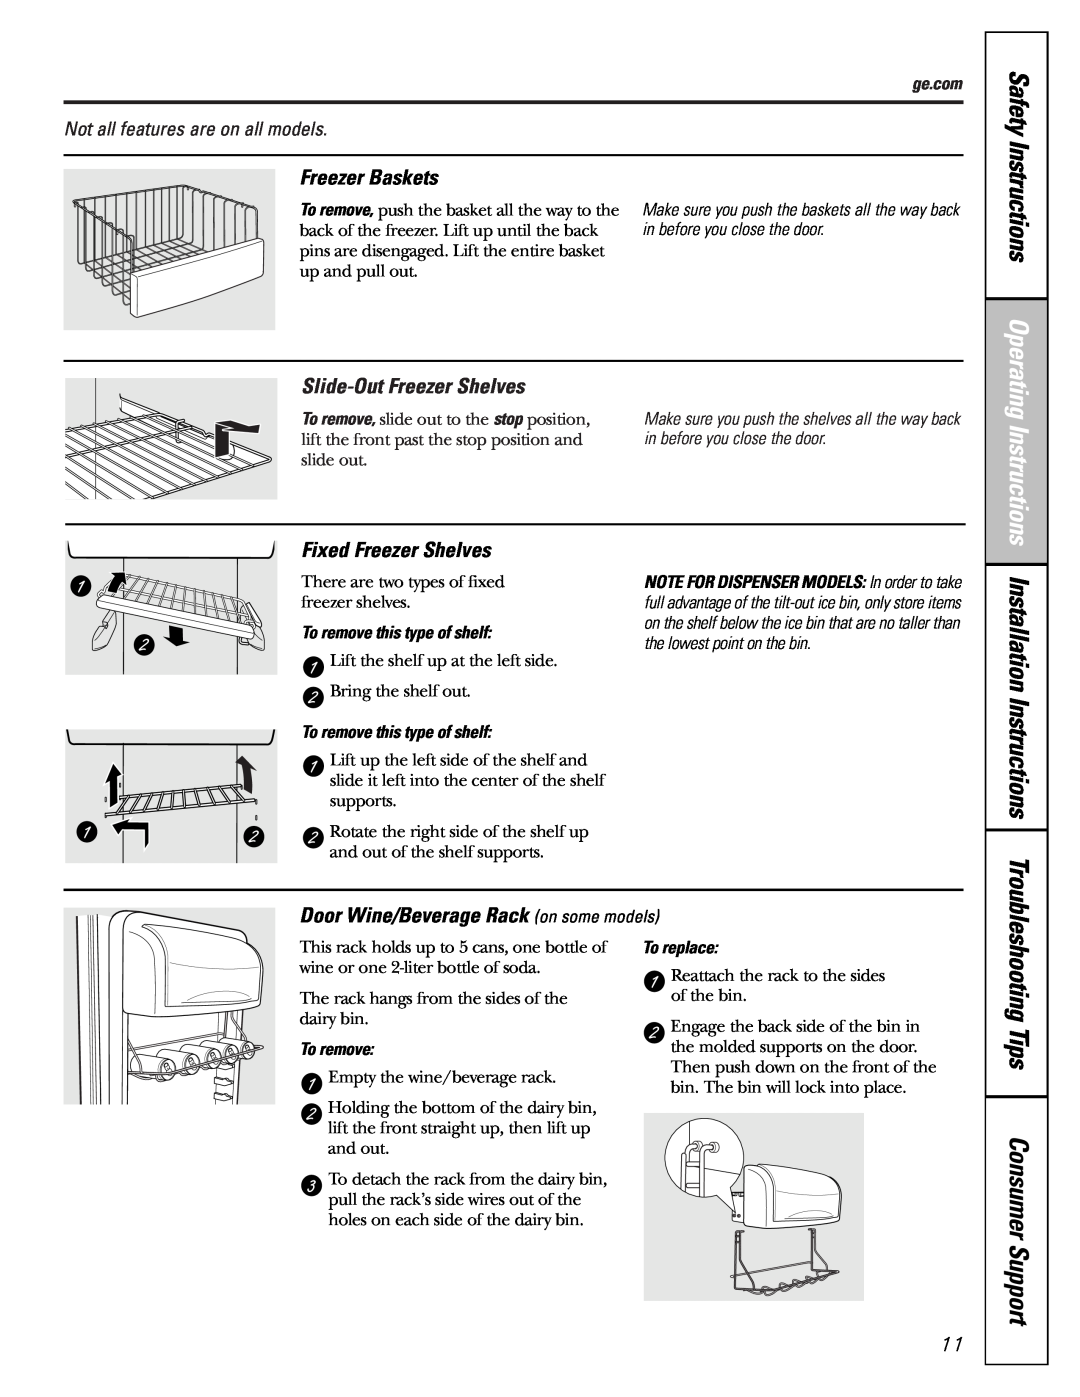 GE 200D8074P009, 49-60456 Installation Instructions, Safety Instructions Operating Instructions, Freezer Baskets, ge.com 